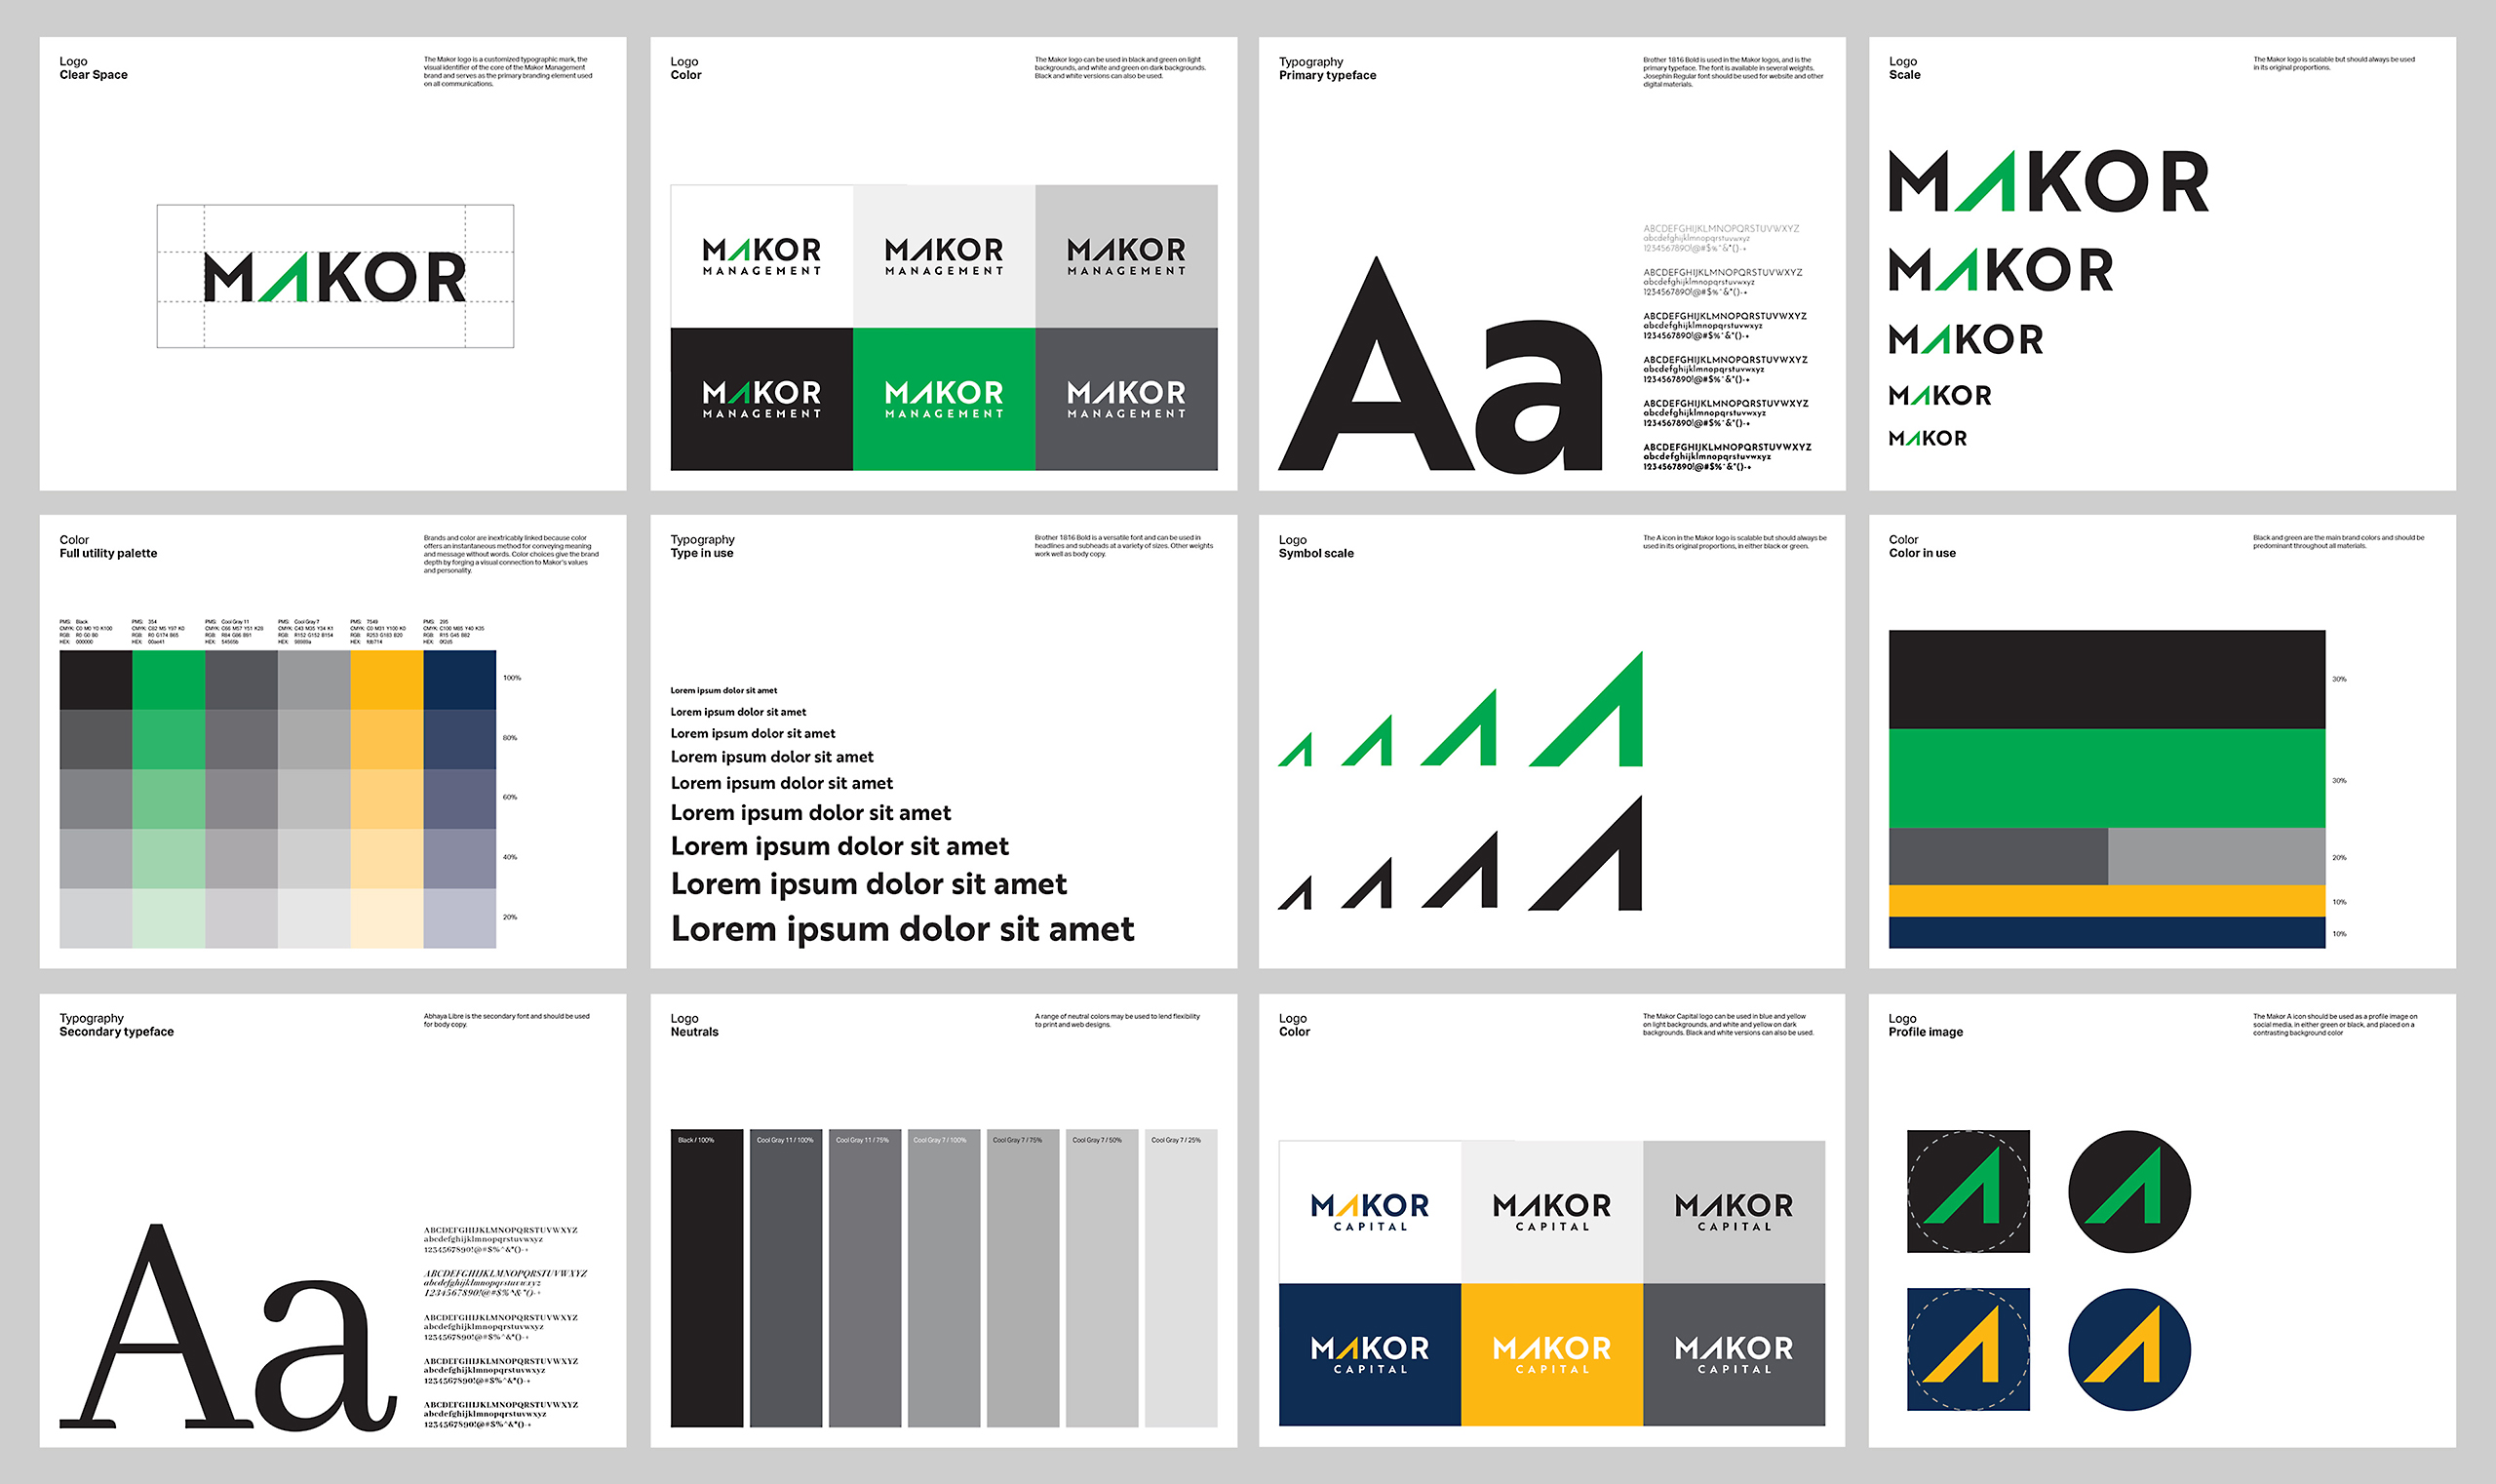 Makor brand guide pages